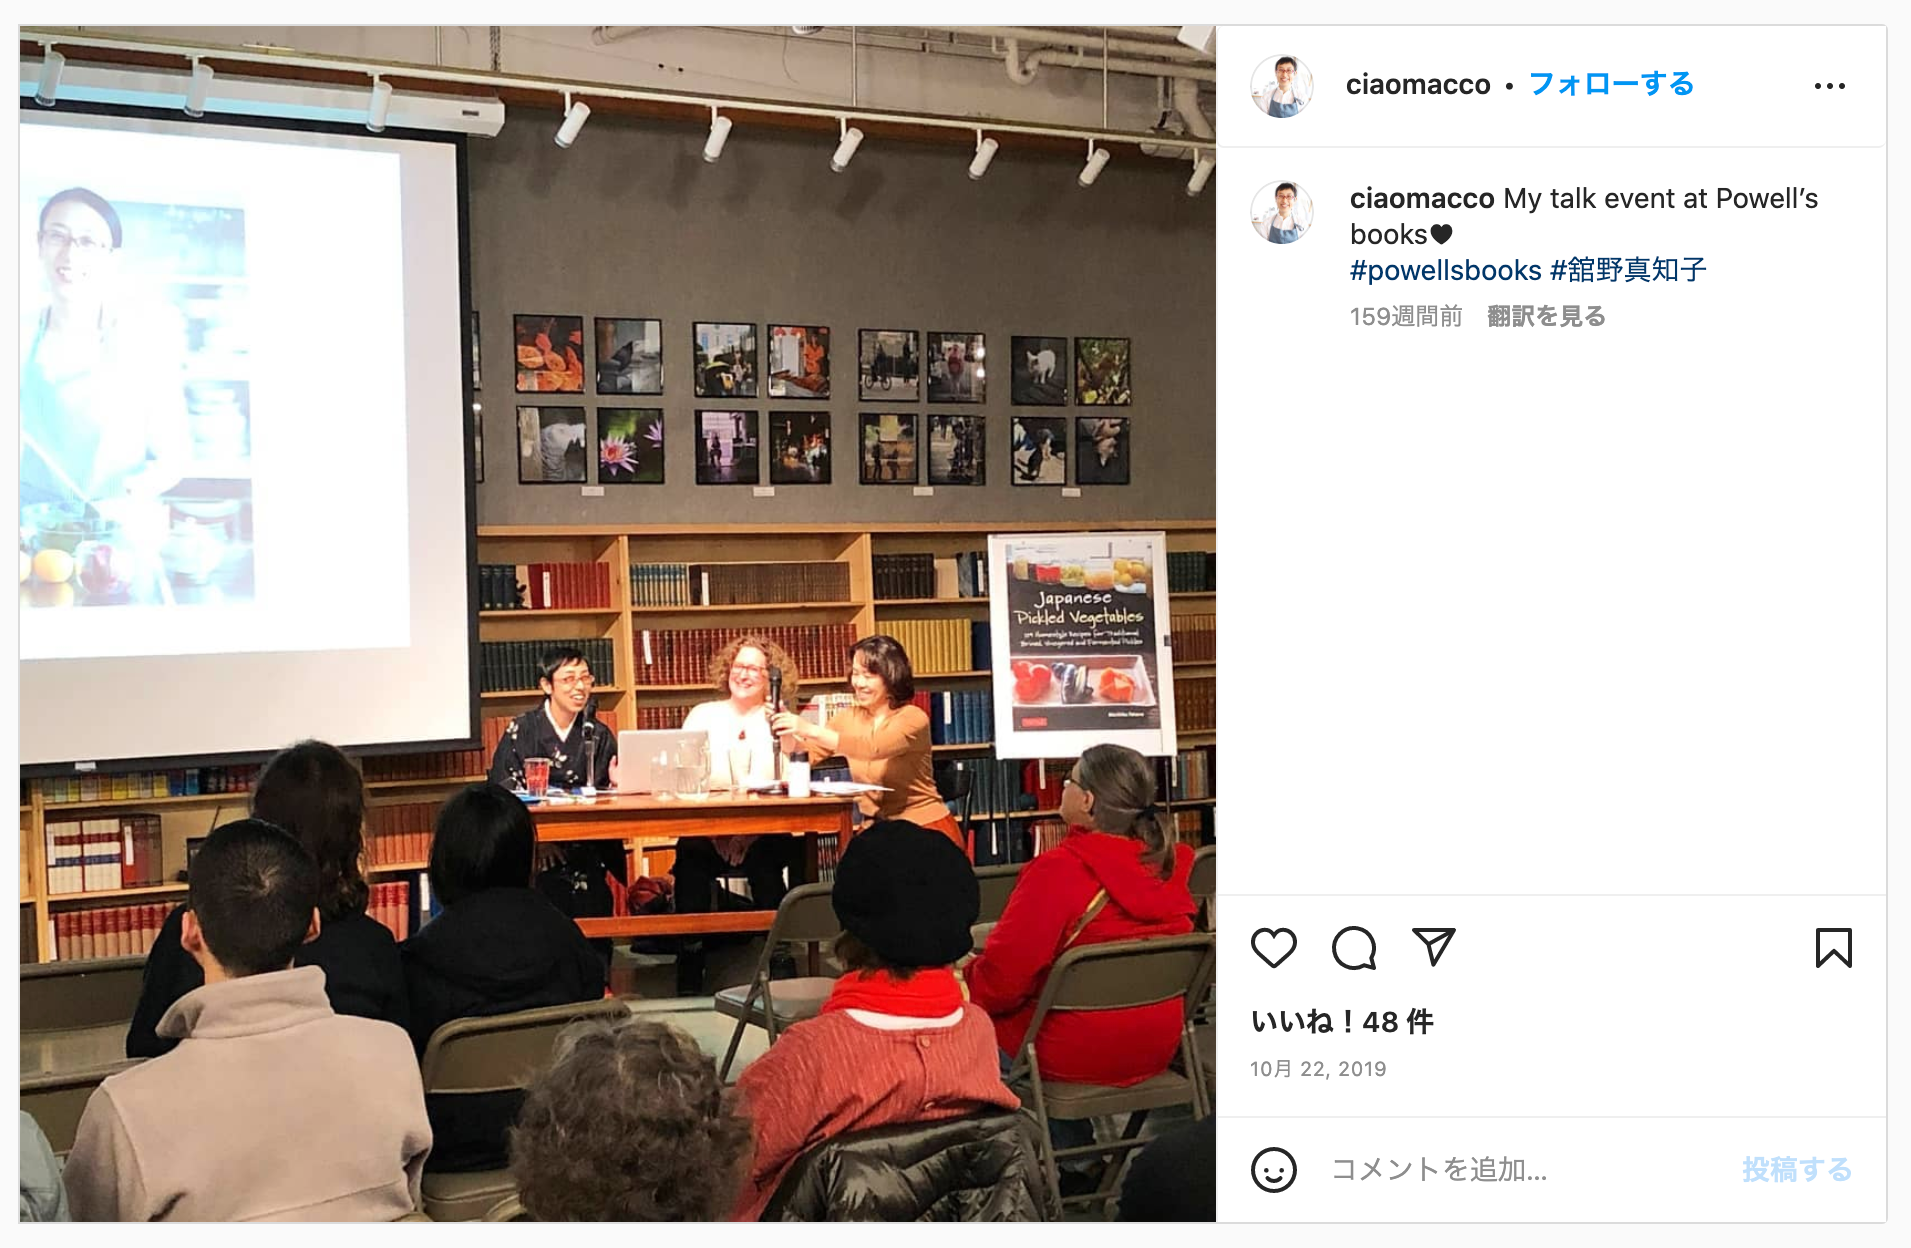 Celebration of “Japanese Pickled Vegetables” at Powell’s City Books, the world’s largest independent bookstore in Portland.
Machiko Tateno official Instagram (@ciaomacco)